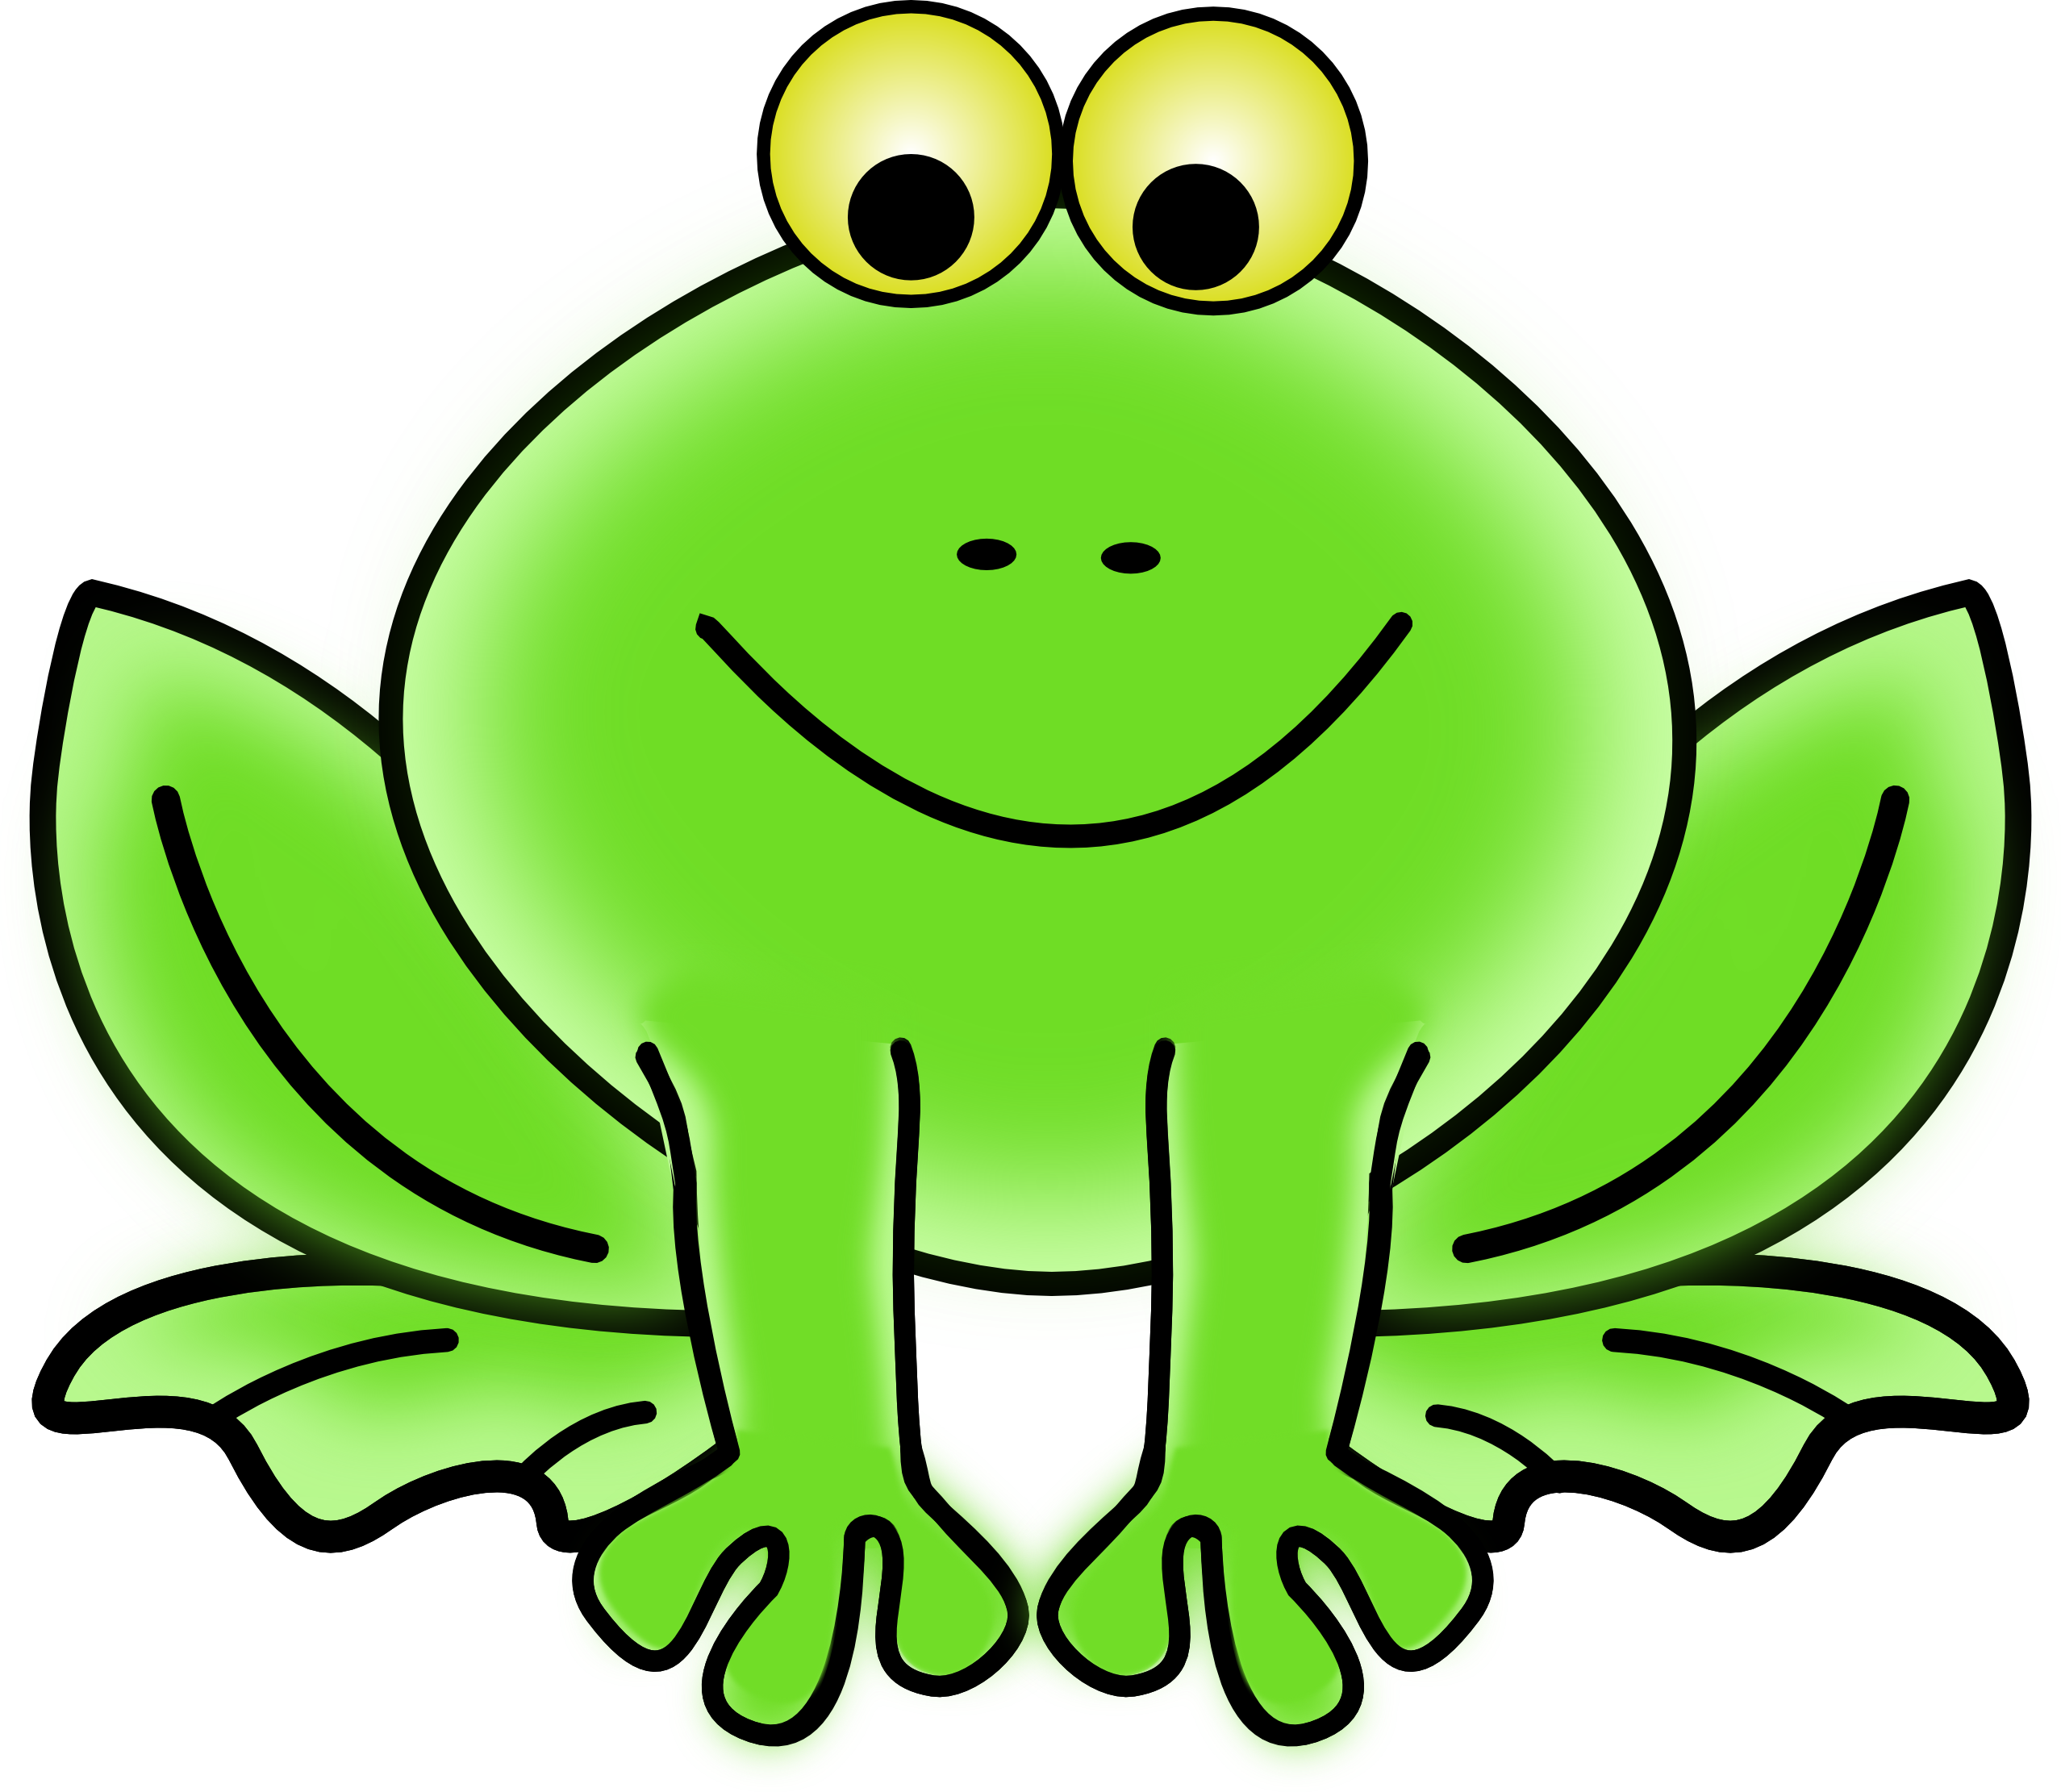 Clipart frog images